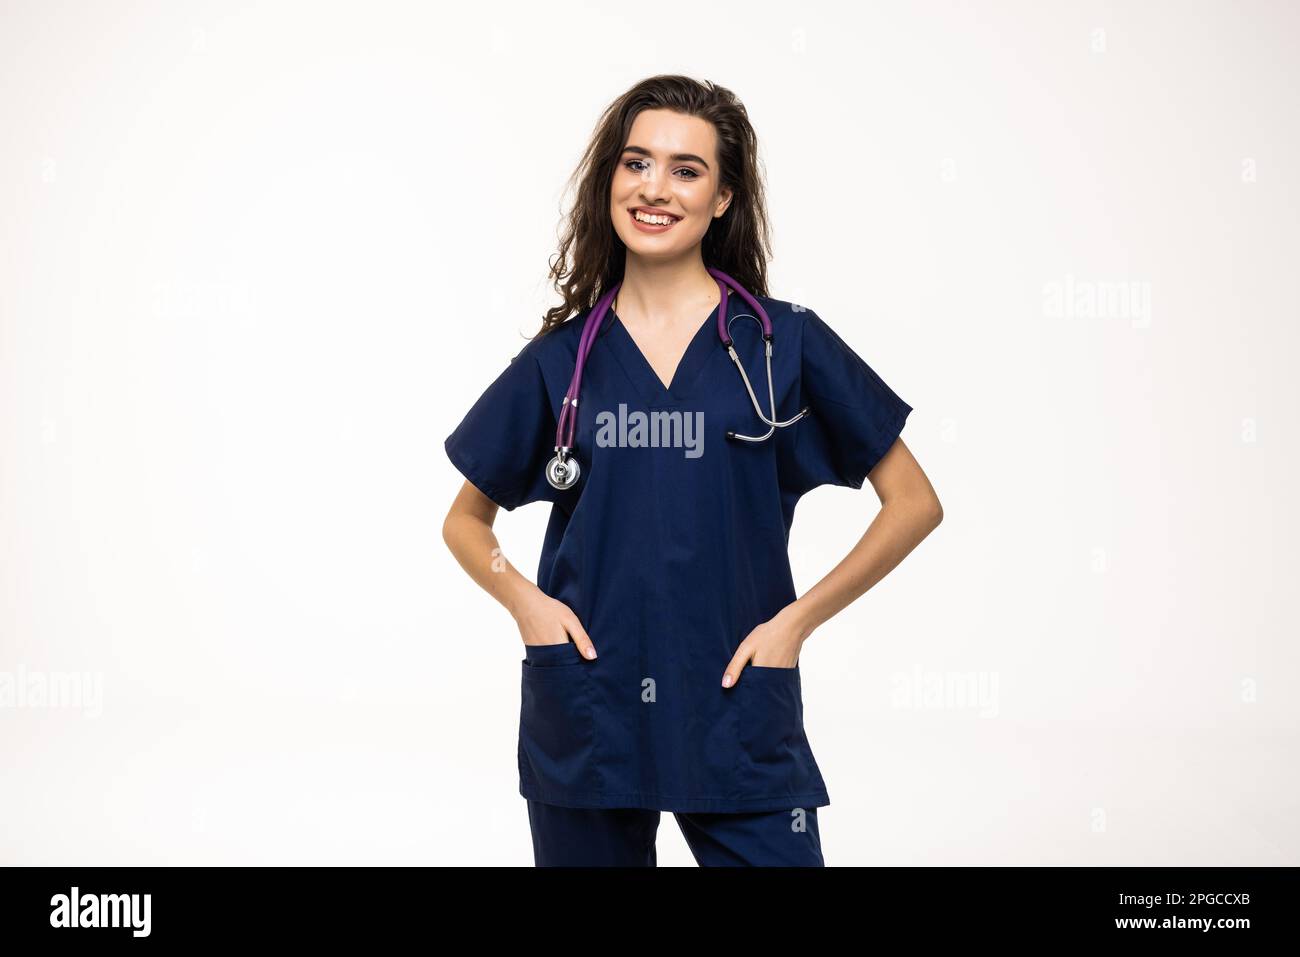 medicine, profession and healthcare concept - happy smiling female doctor or scientist in white coat Stock Photo